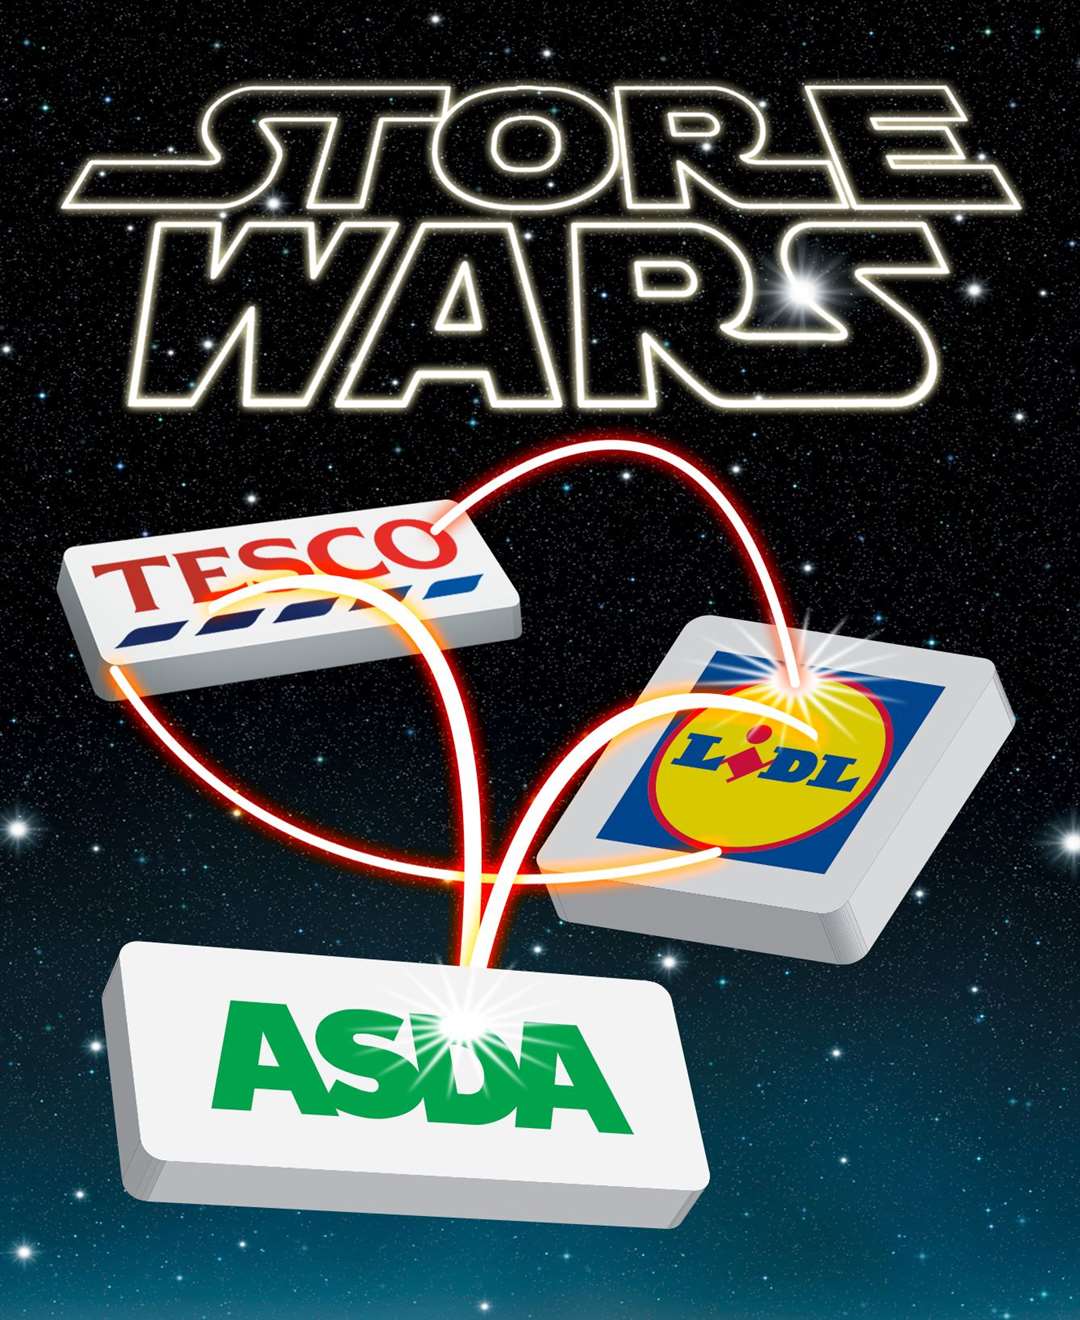 Store Wars broke out when Tesco and Asda opposed the Lidl proposals in Gillingham